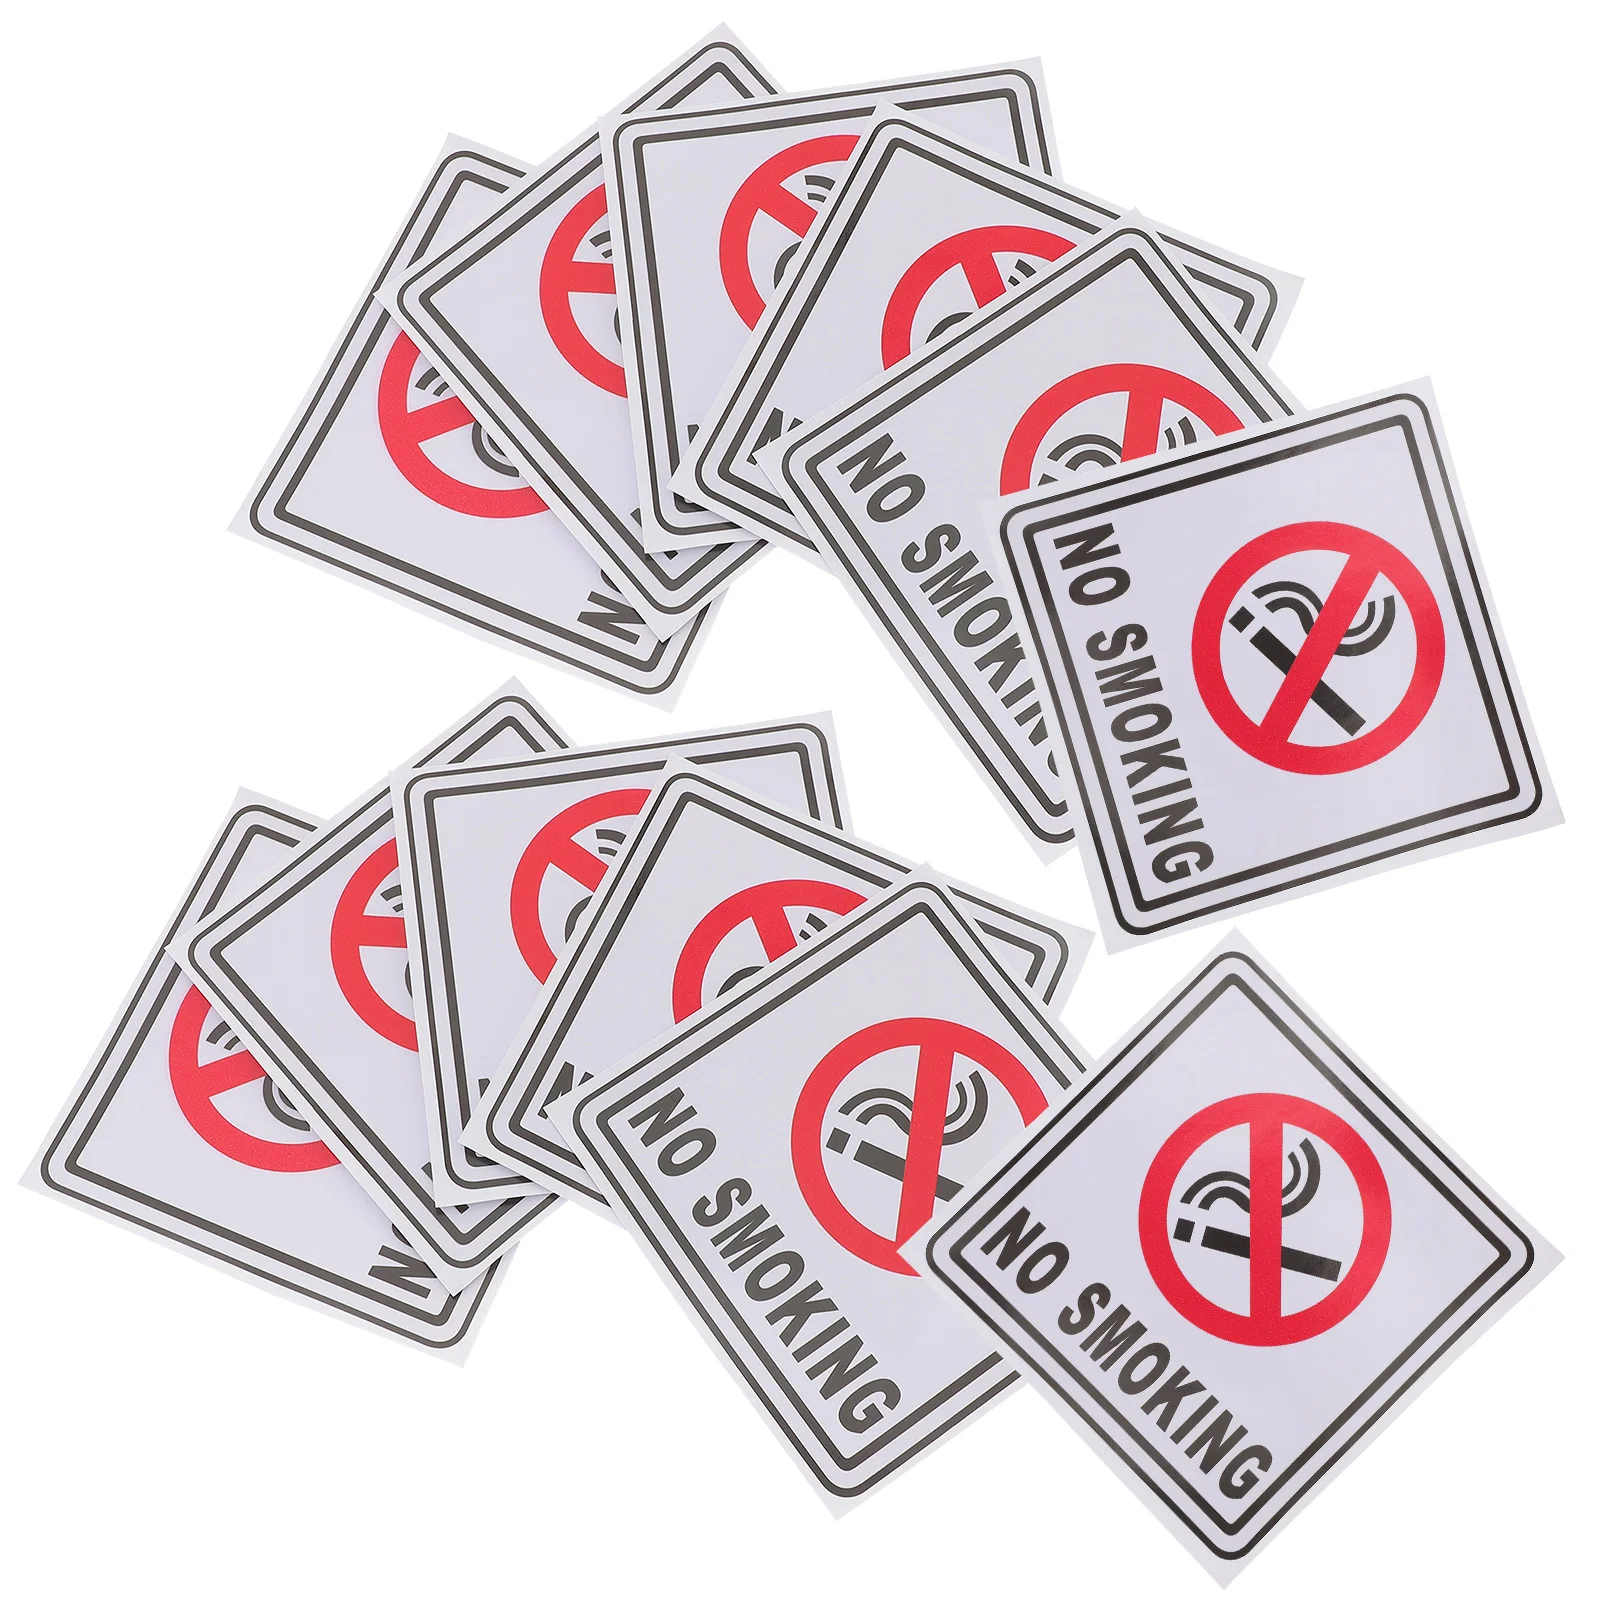 

No Smoking Sign Sticker Warning Stickers Stop Symbol Decal Waterproof Cars Vaping Vehicles Self Adhesive Non Labels Do Not Free